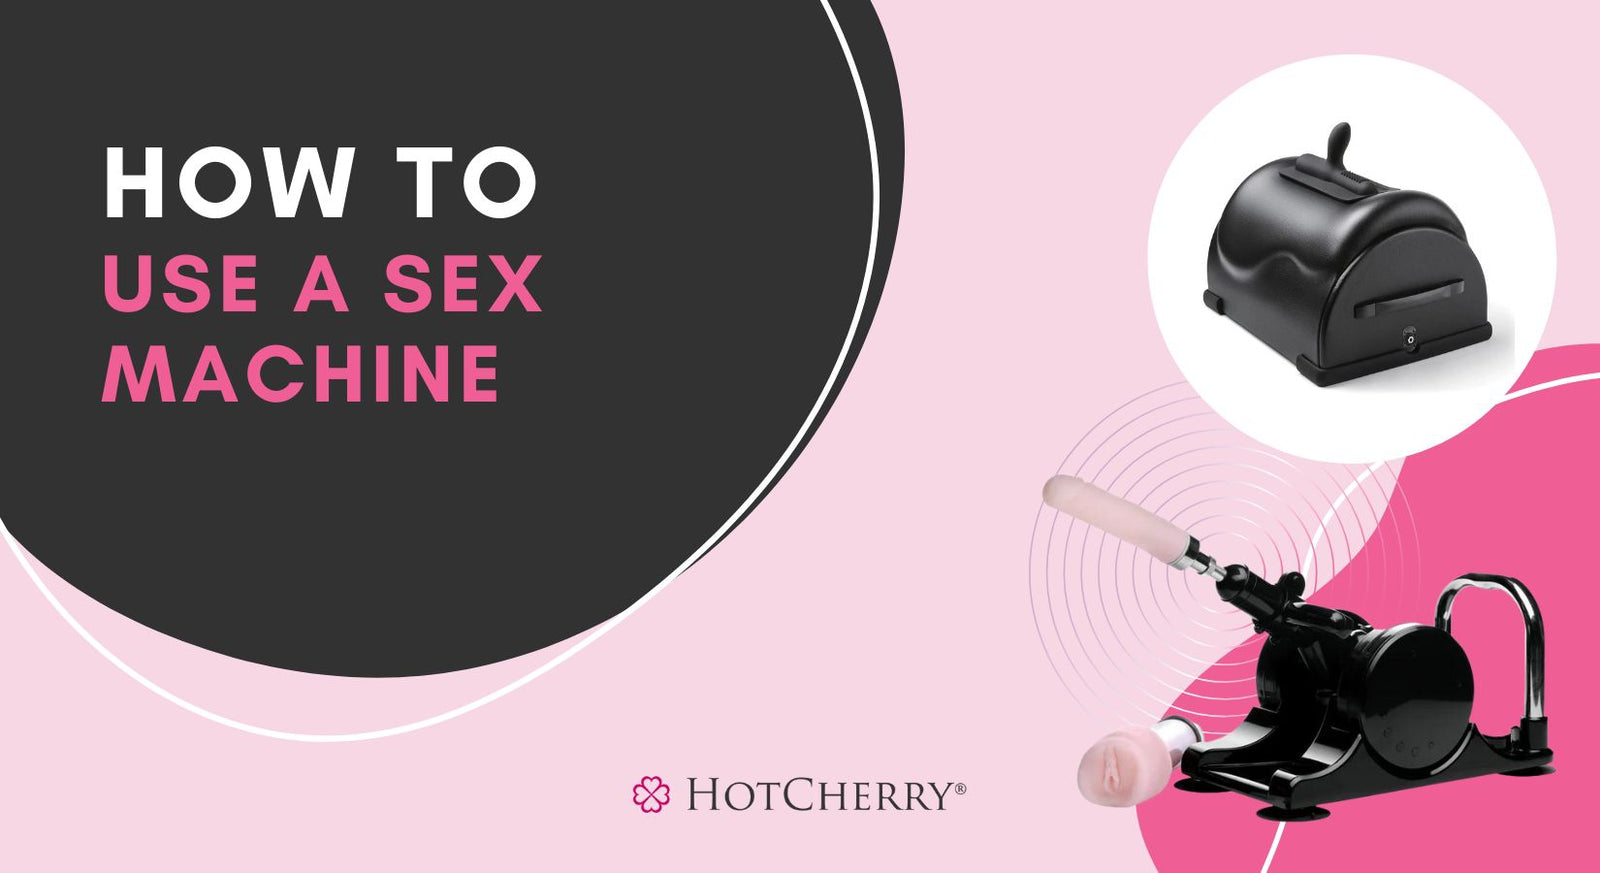 How To Use Sex Machines for Powerful Hands-Free Orgasm